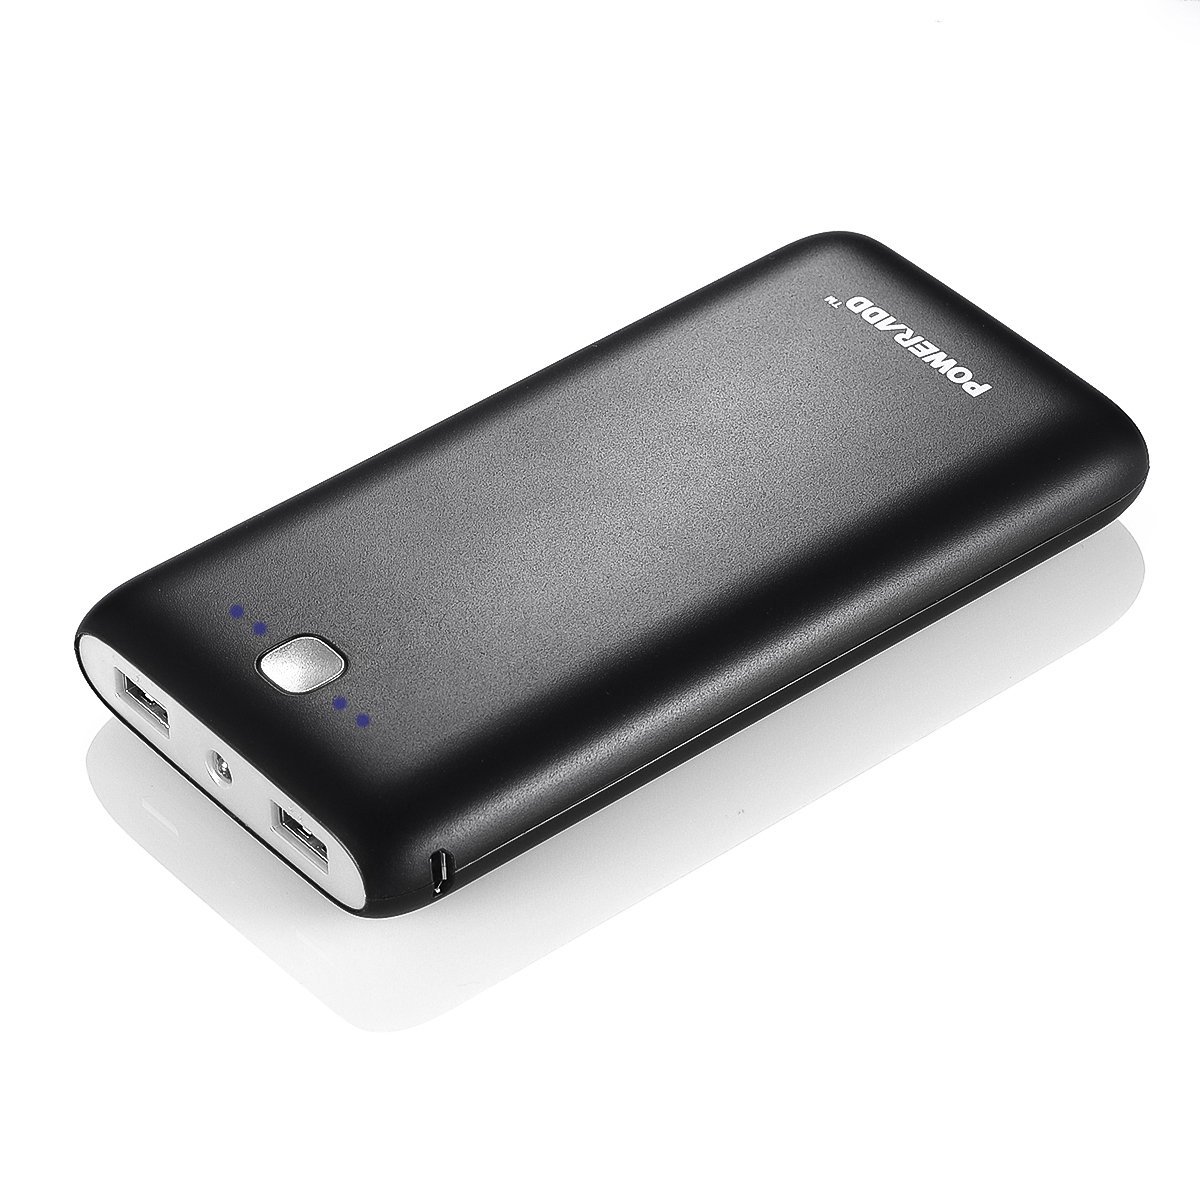 Poweradd Pilot X7 20000mAh External Battery Power Bank for Smartphones and Tablets – Just $16.59!